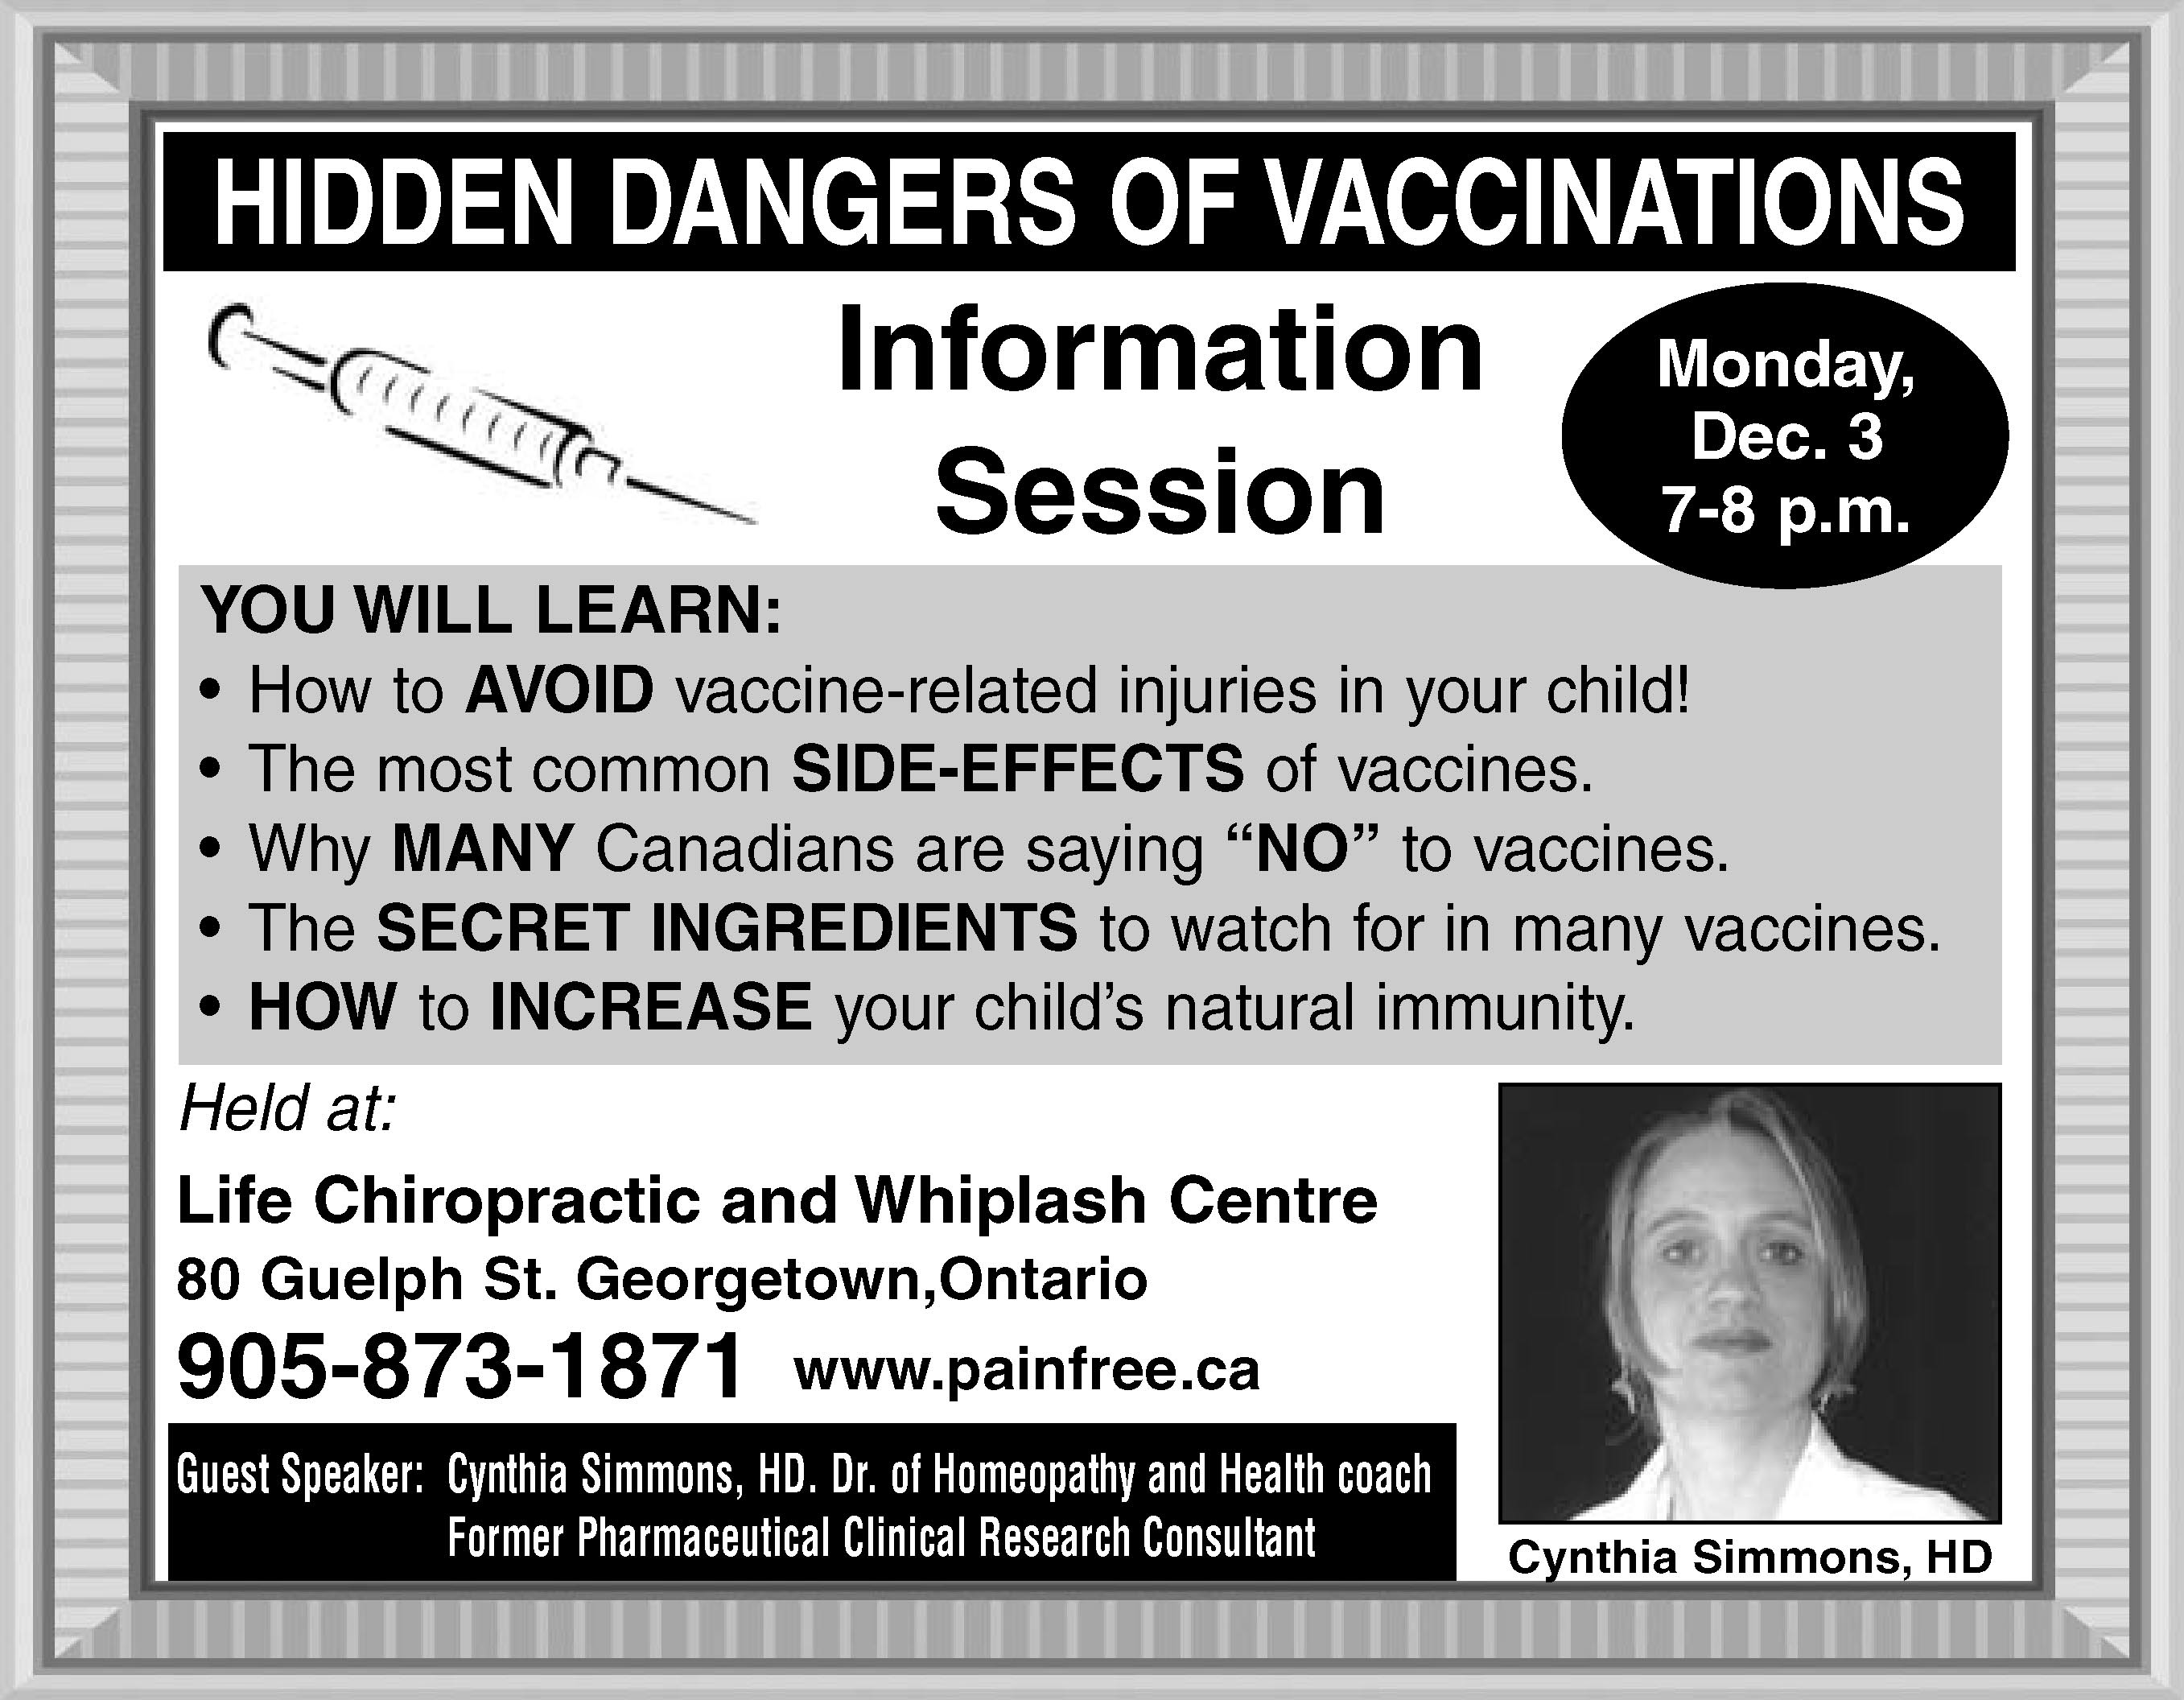 Cynthia Simmons anti-vaccine talk at Georgetown chiropractor's office